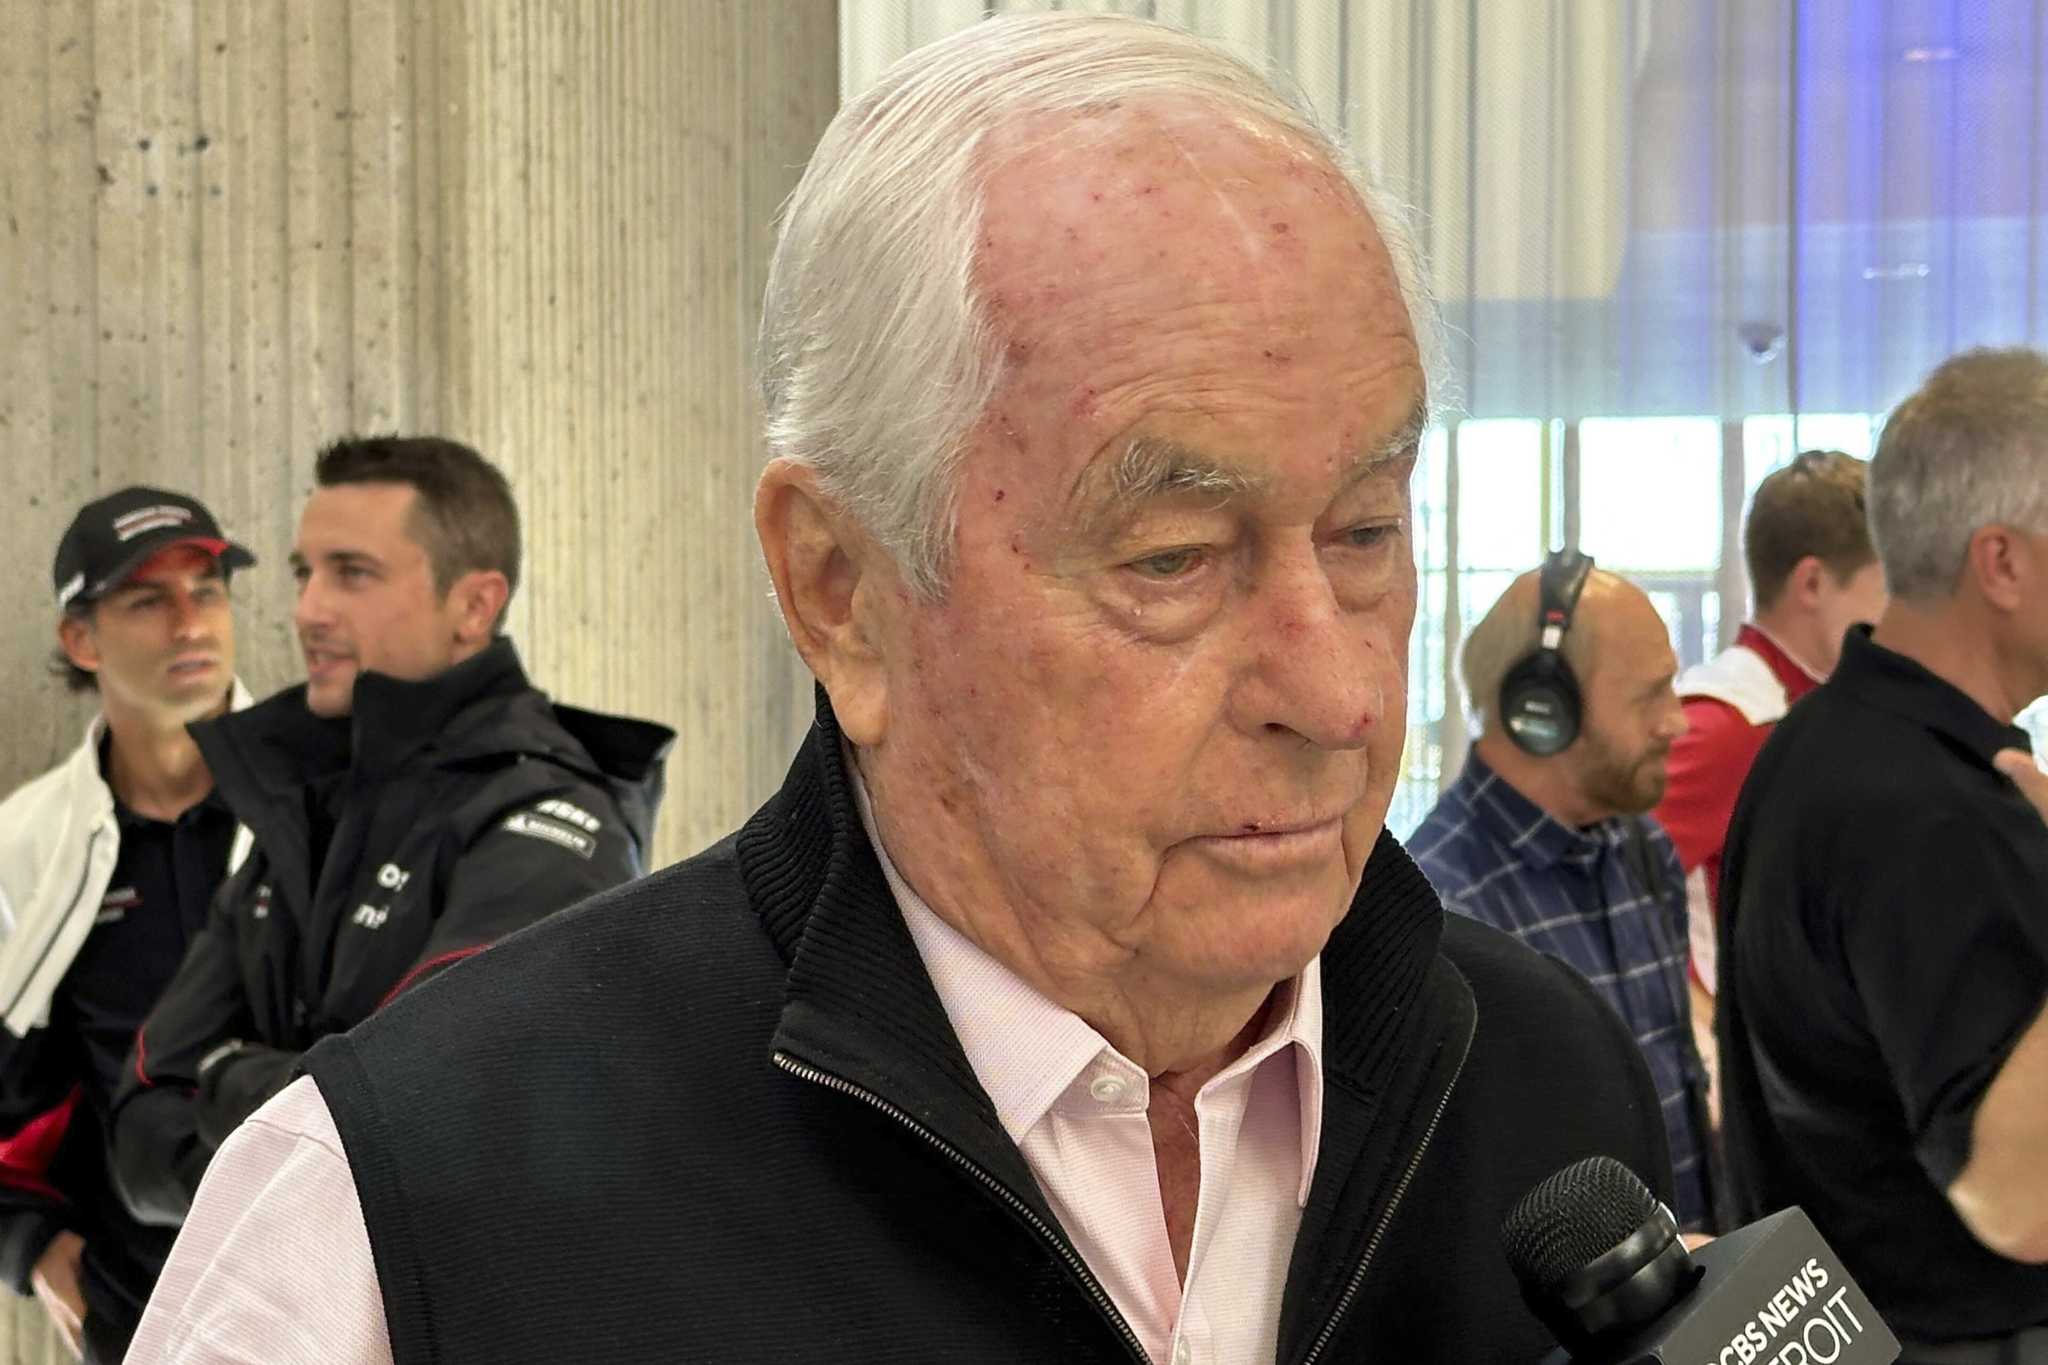 Roger Penske tells AP cheating scandal overblown by critics because there's 'blood in the water'